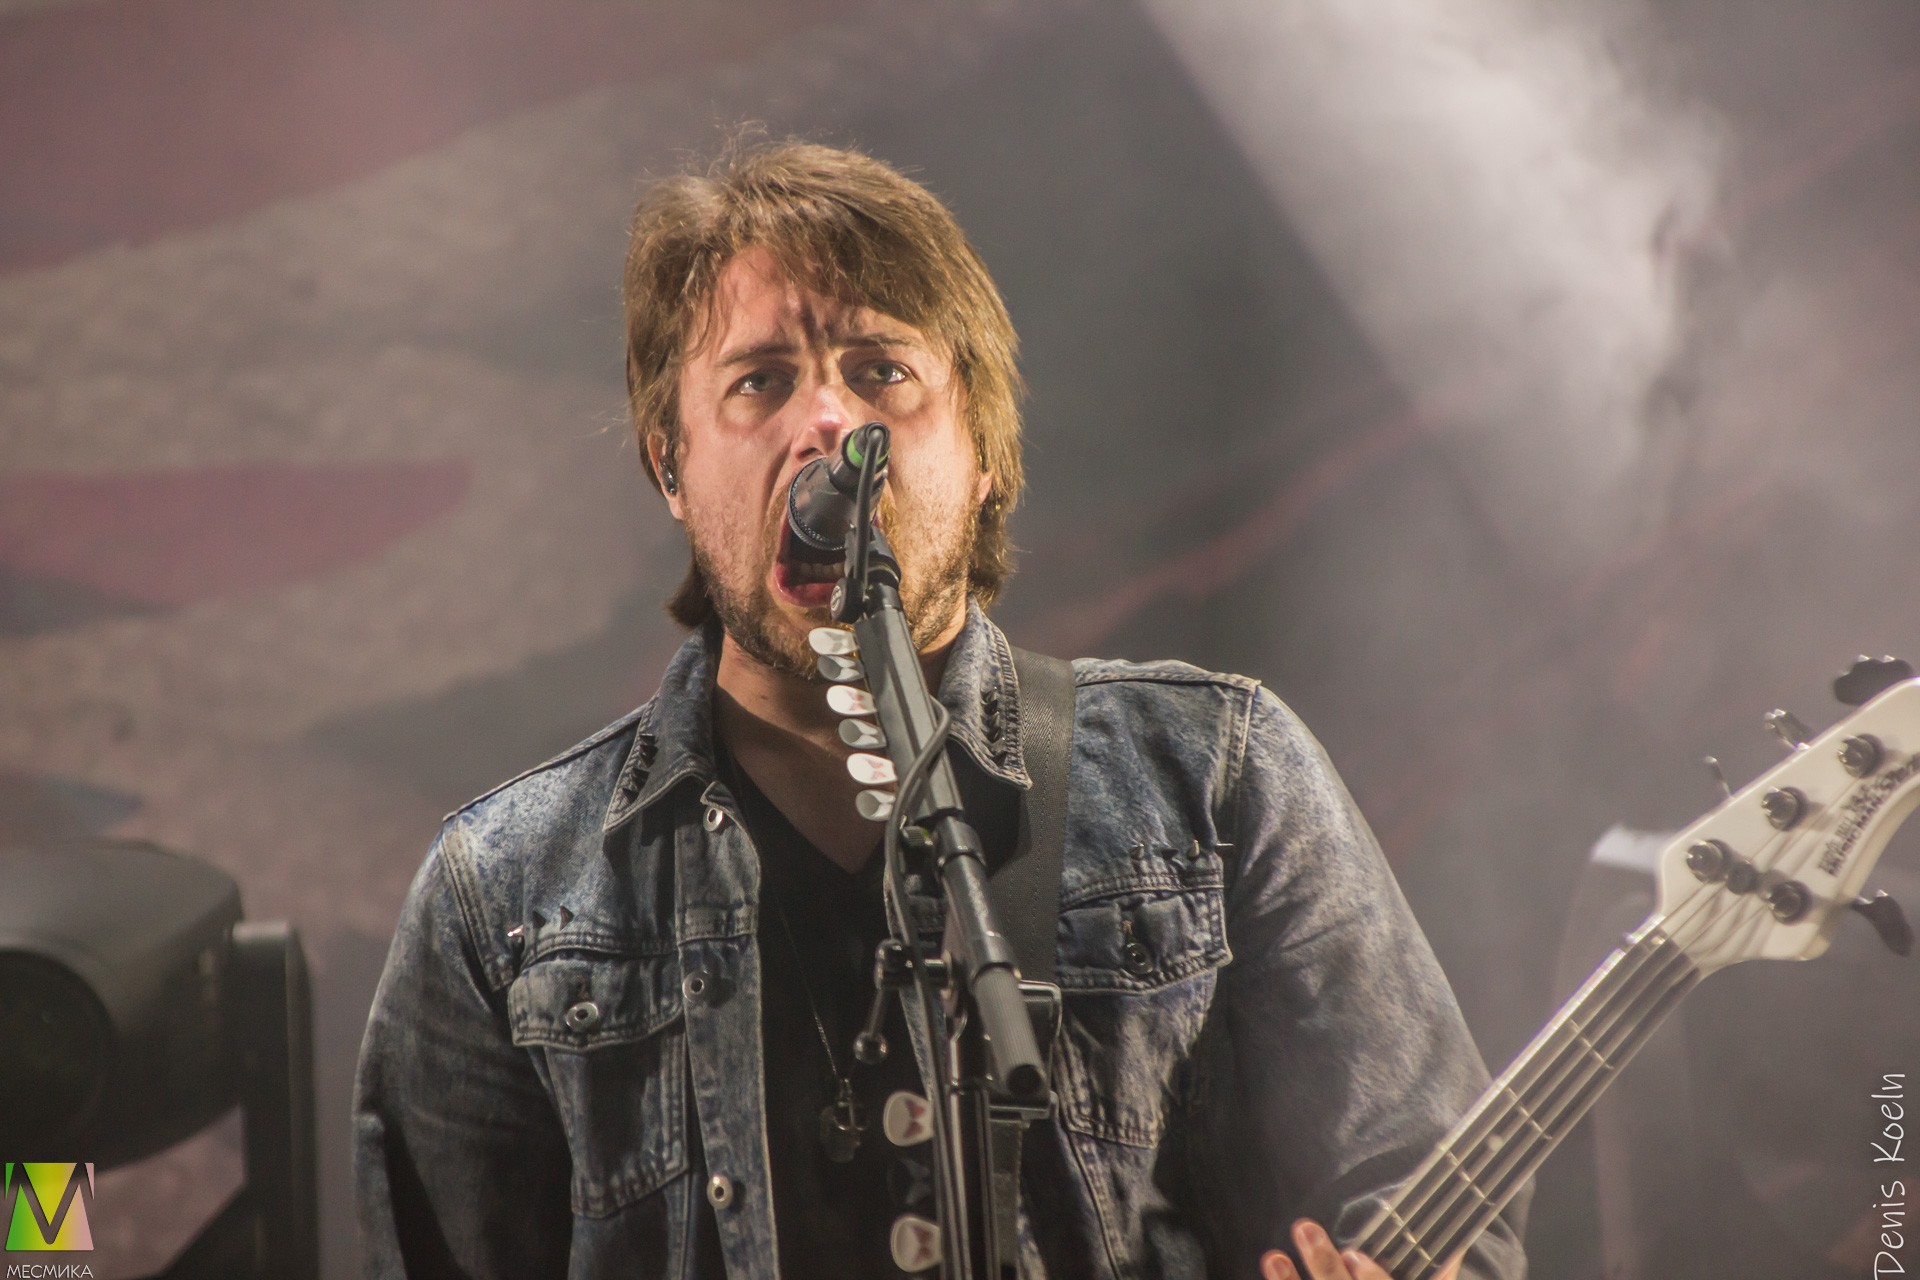 Bullet For My Valentine at Summer Breeze